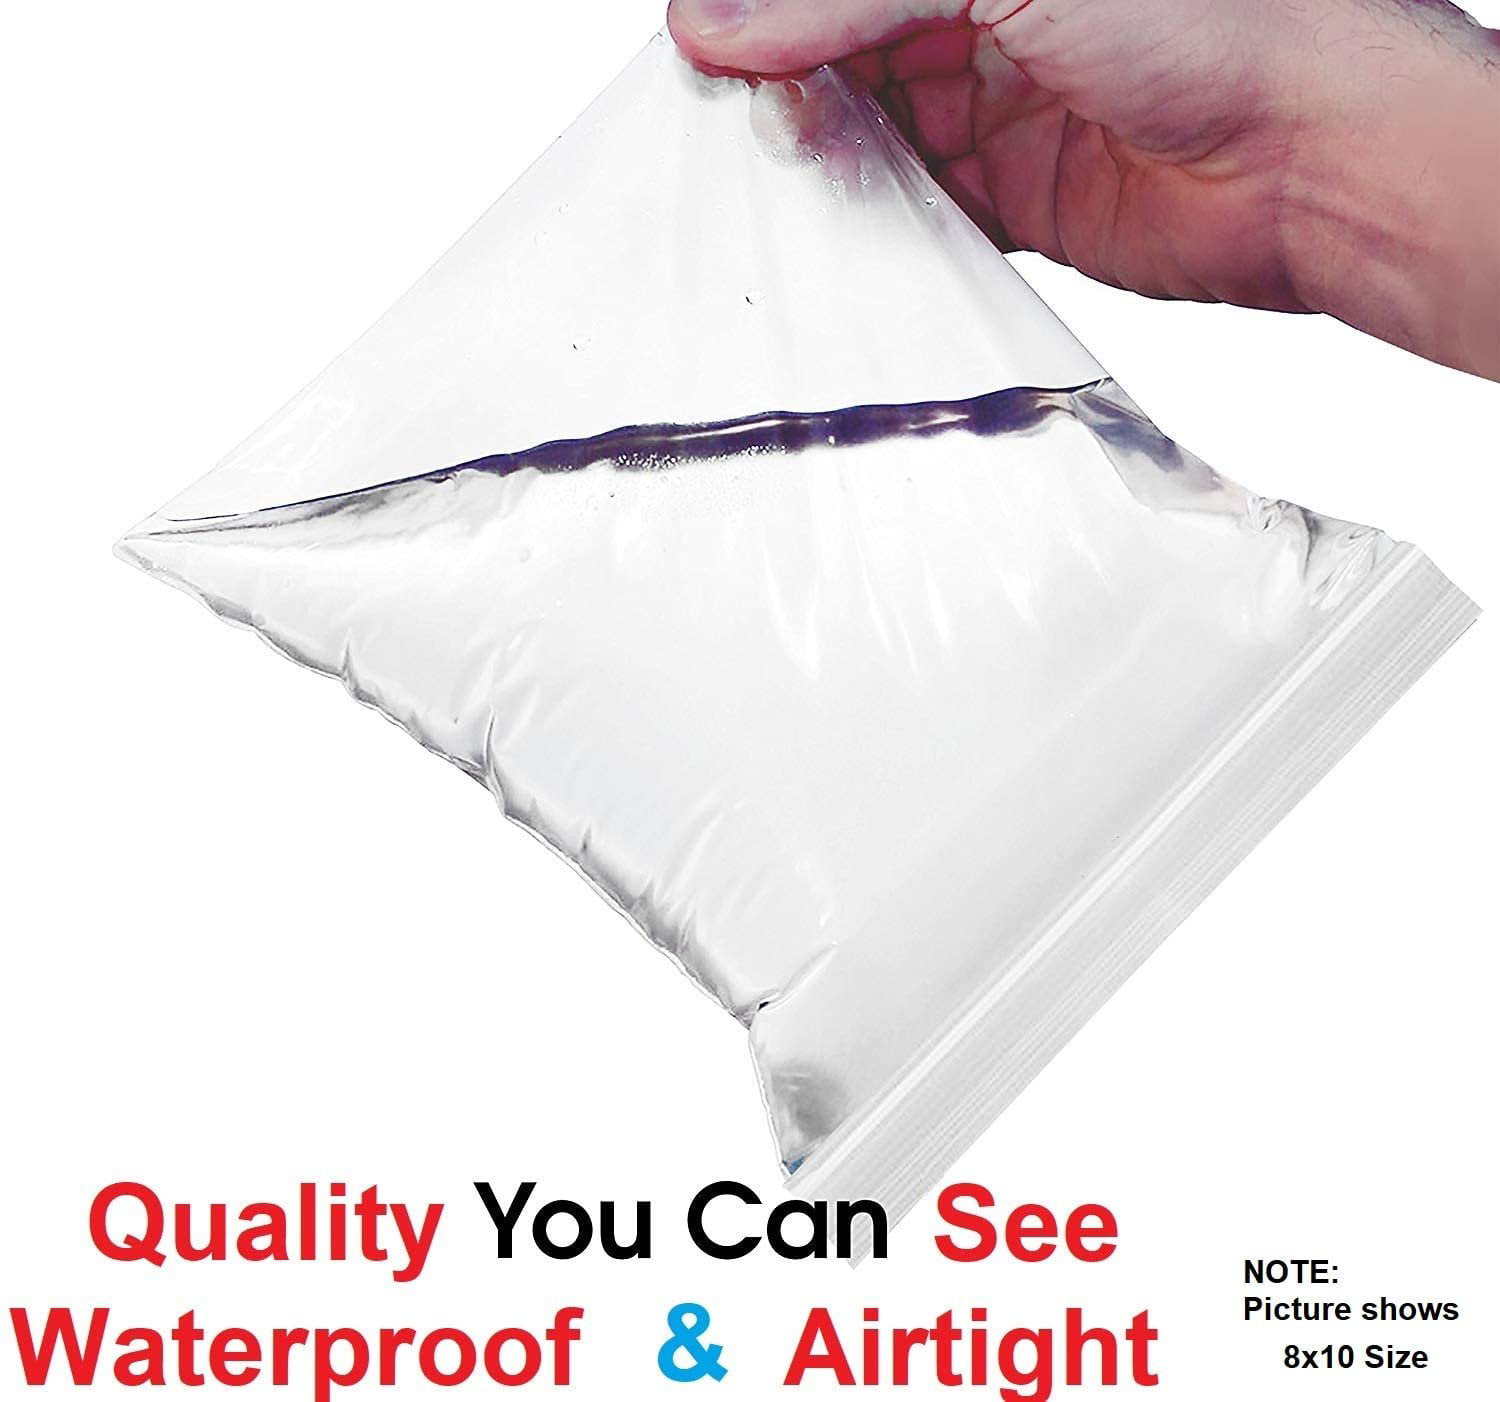 4" x 4" 2 MIL ZIPLOCK PLASTIC BAGS RECLOSABLE POLYBAG FAST SAME DAY SHIPPING